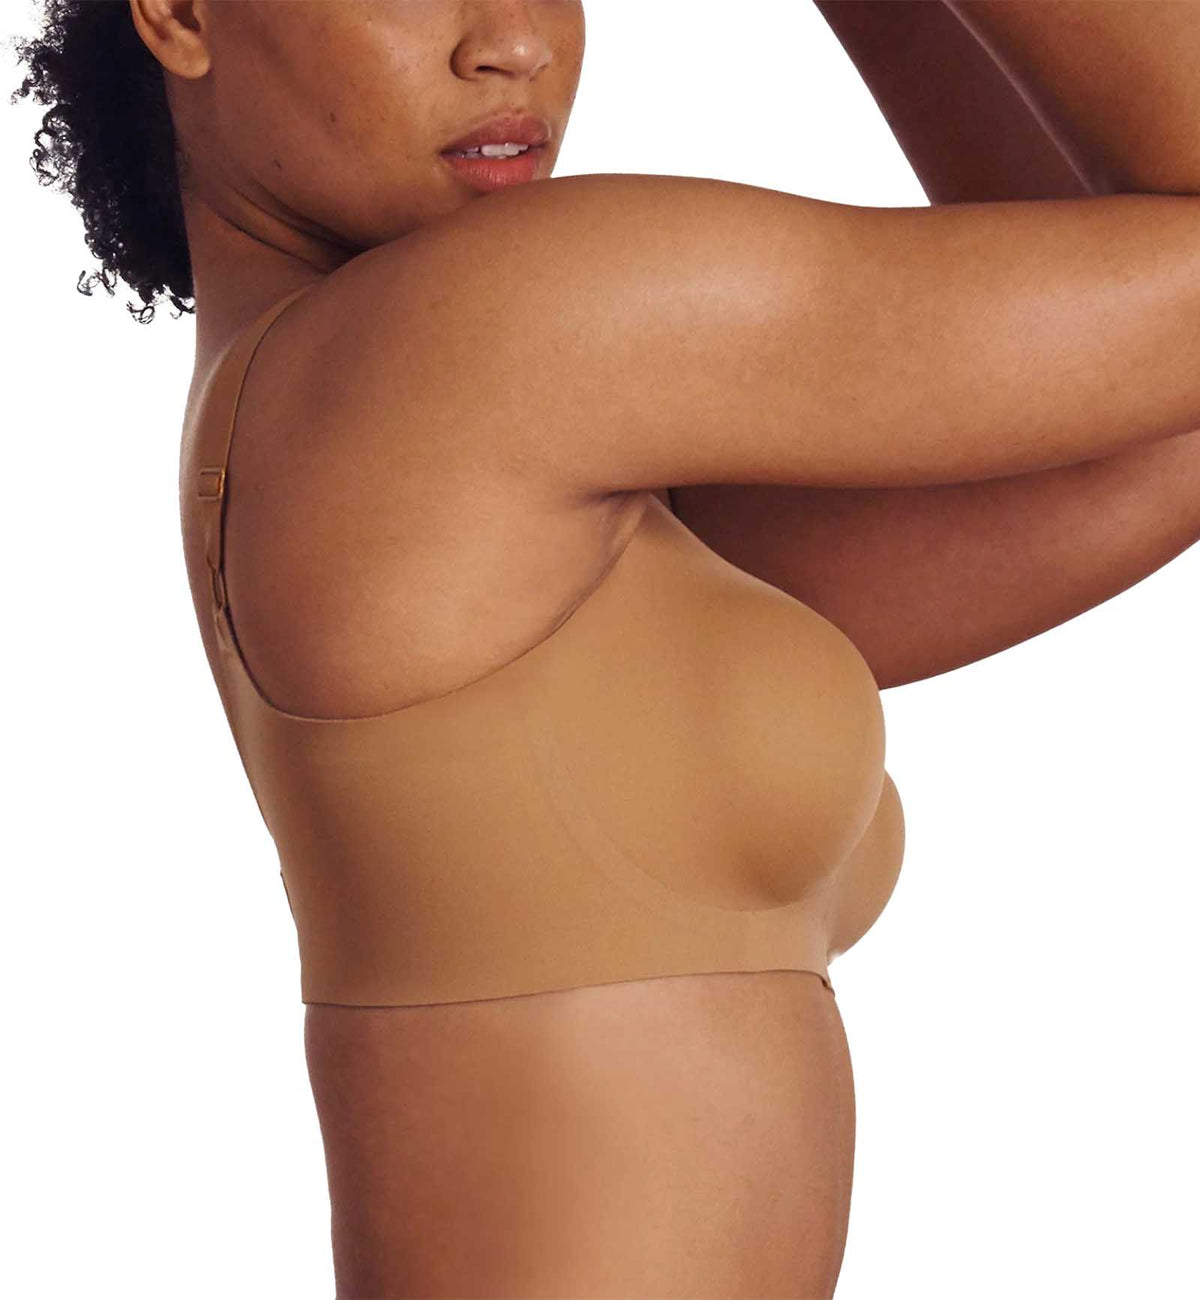 Evelyn &amp; Bobbie BEYOND Adjustable Bra (1732),Small,Mica - Mica,Small